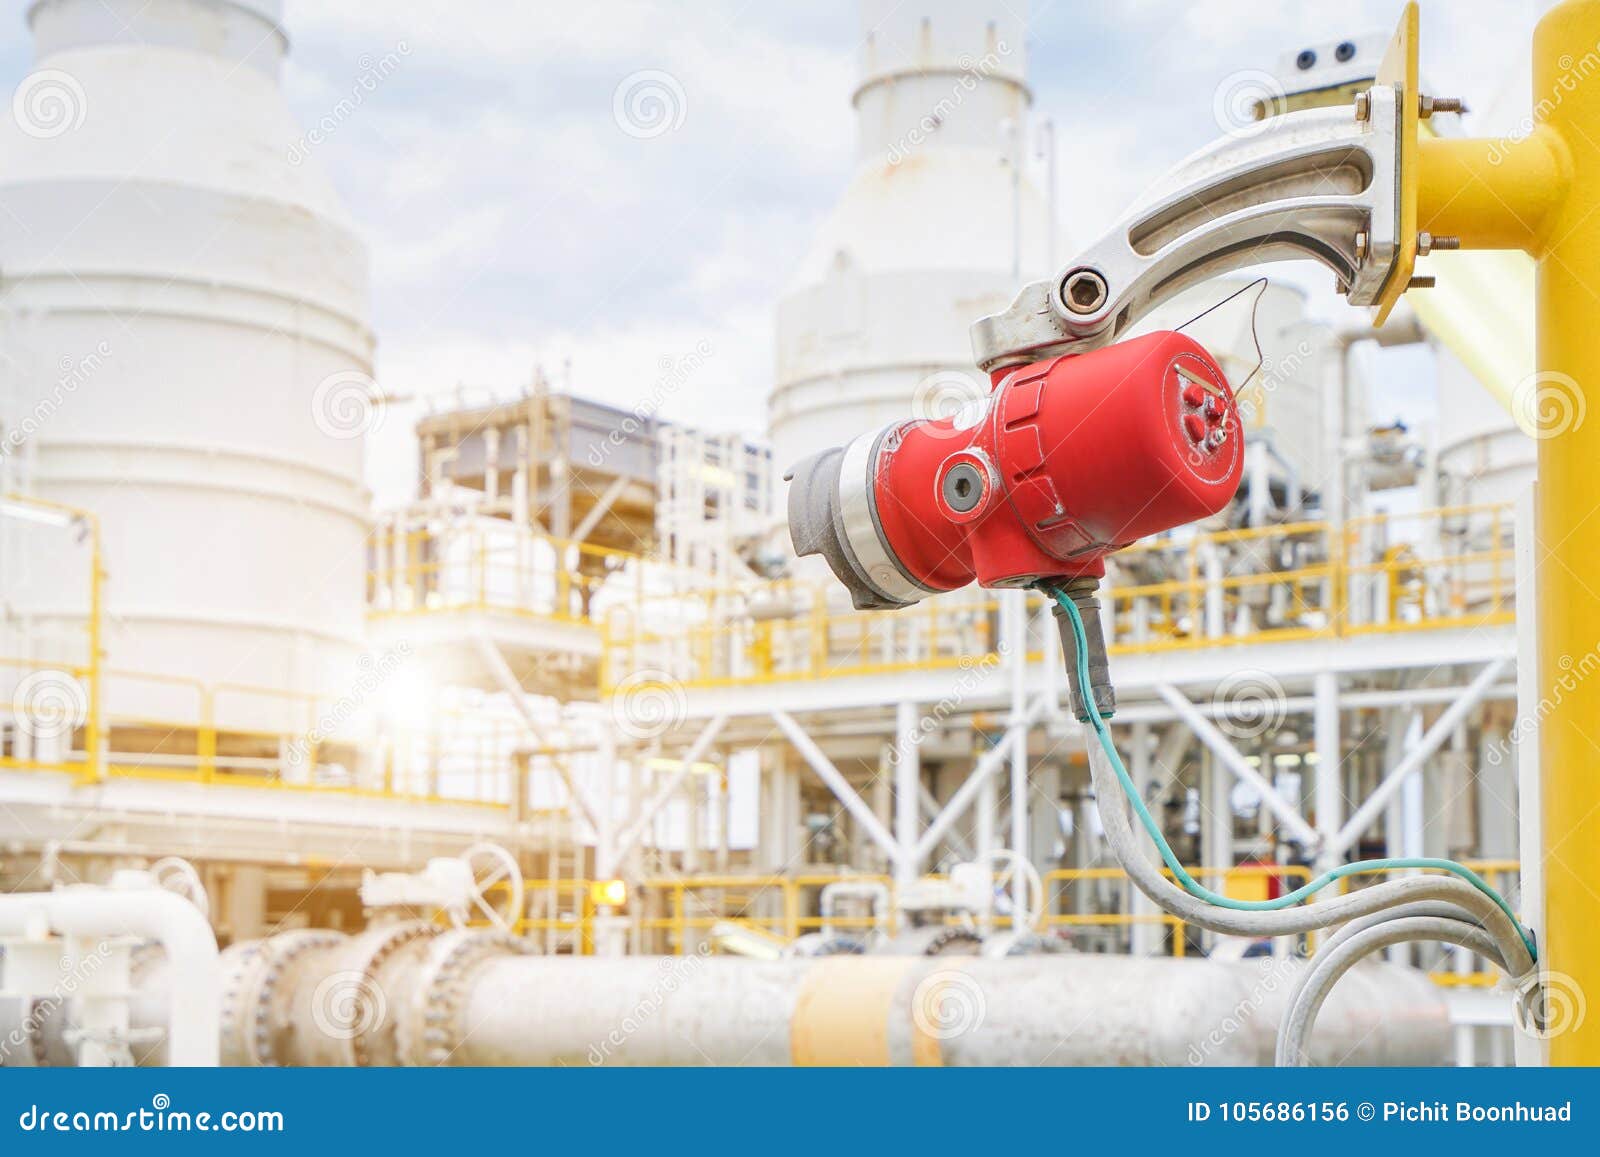 fire and gas detection and monitoring system in hazardous area i